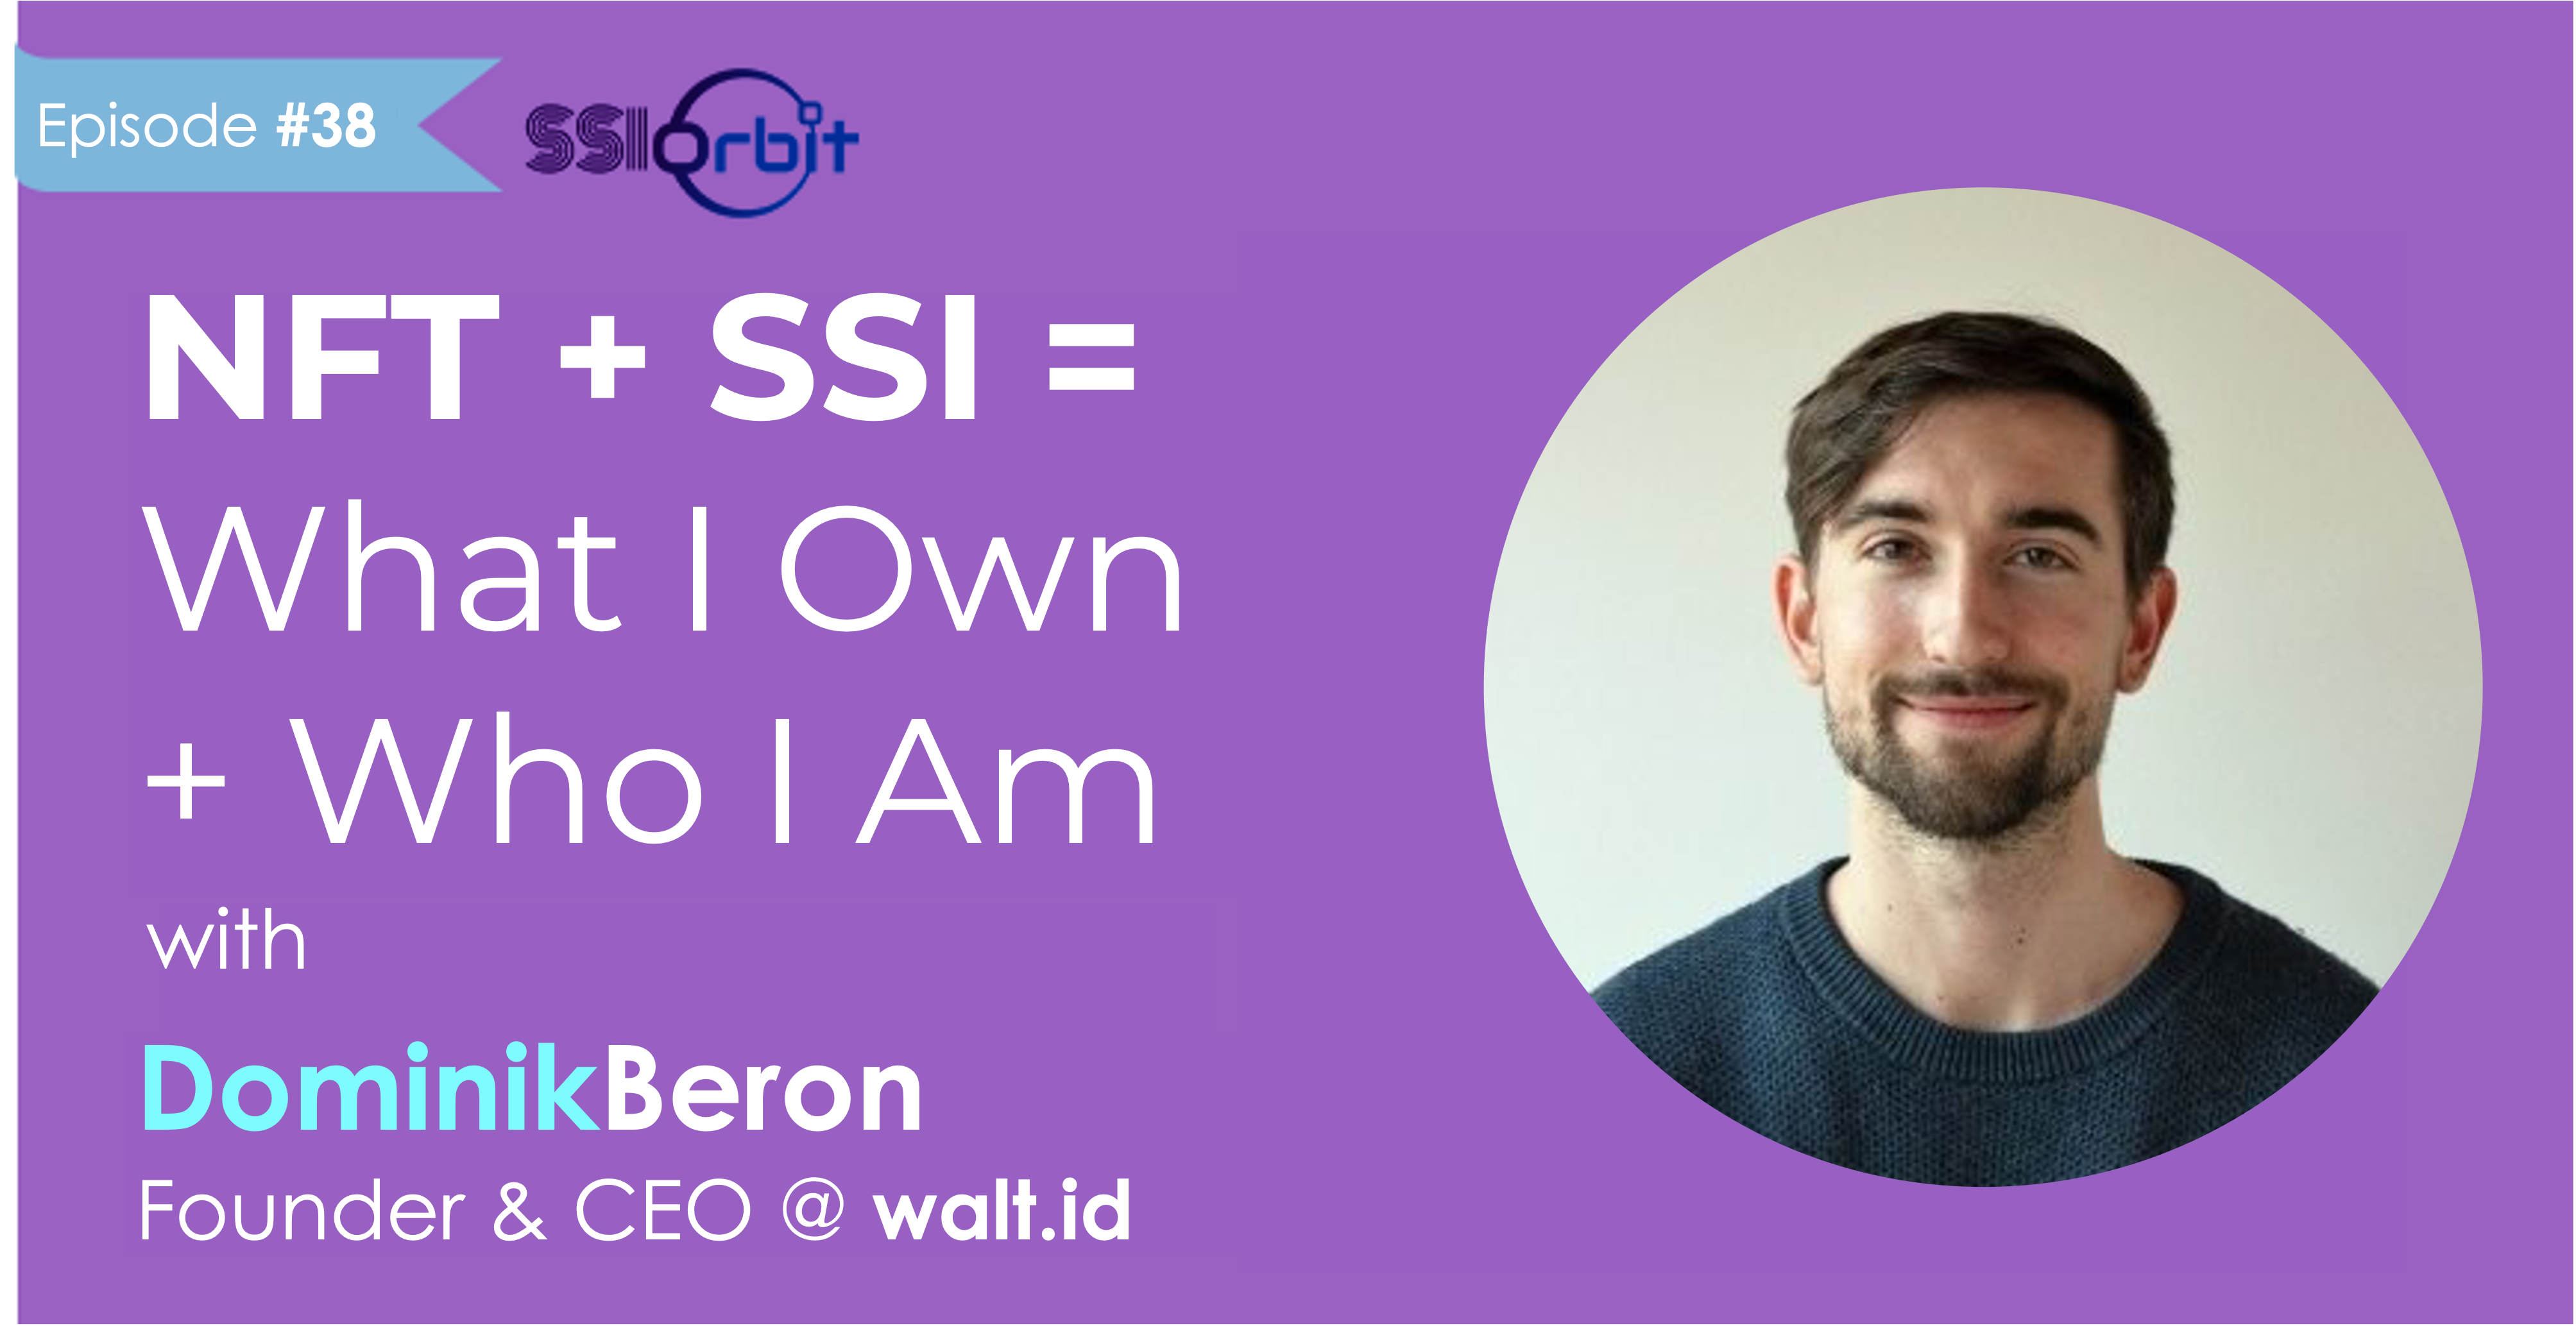 NFT + SSI = What I Own + Who I Am (with Dominik Beron)